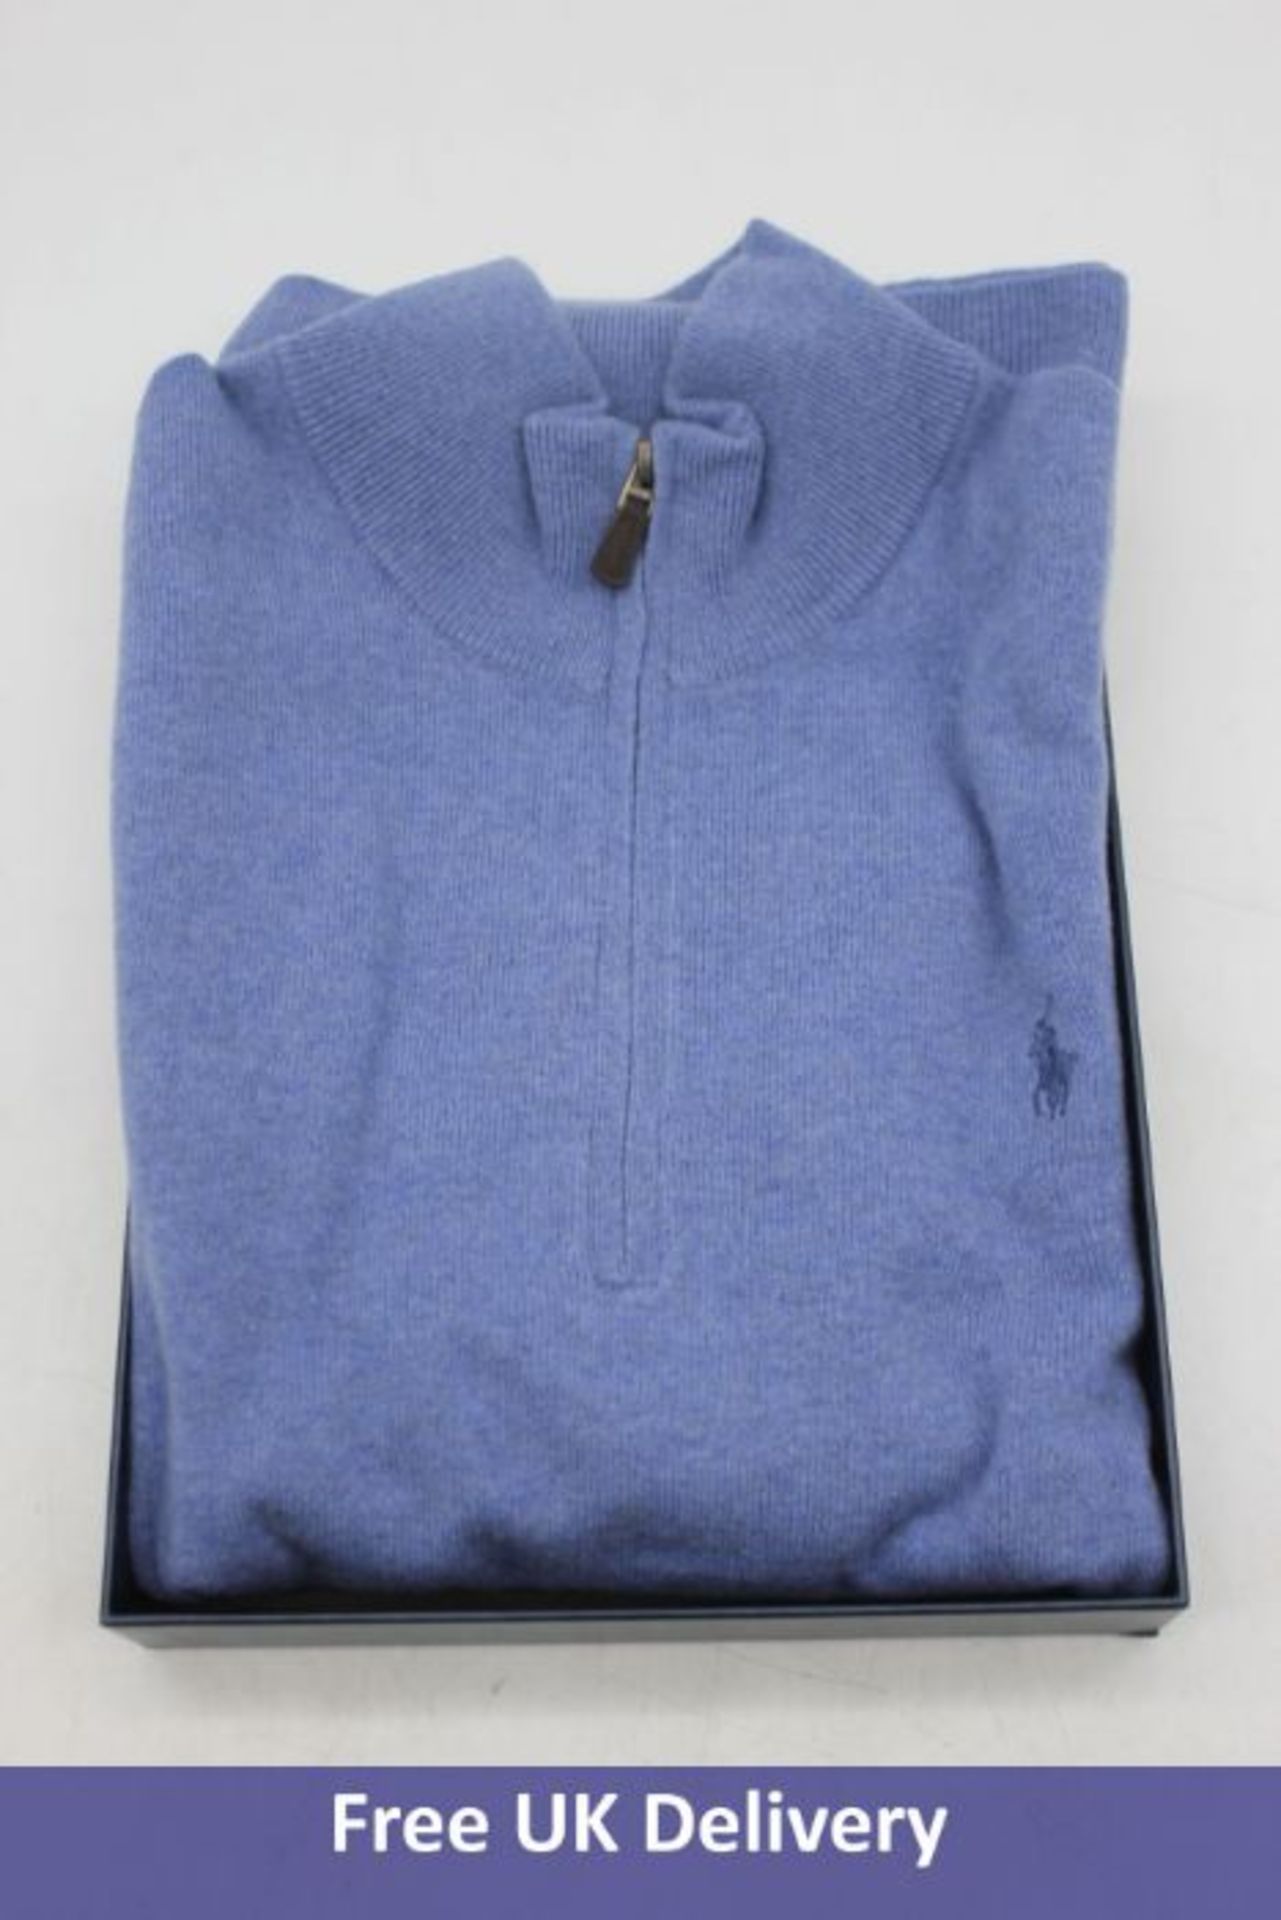 Two items of Ralph Lauren Men's Clothing to include 1x Logo-Print Double-Knit Sweatshirt, Red, M and - Image 2 of 2